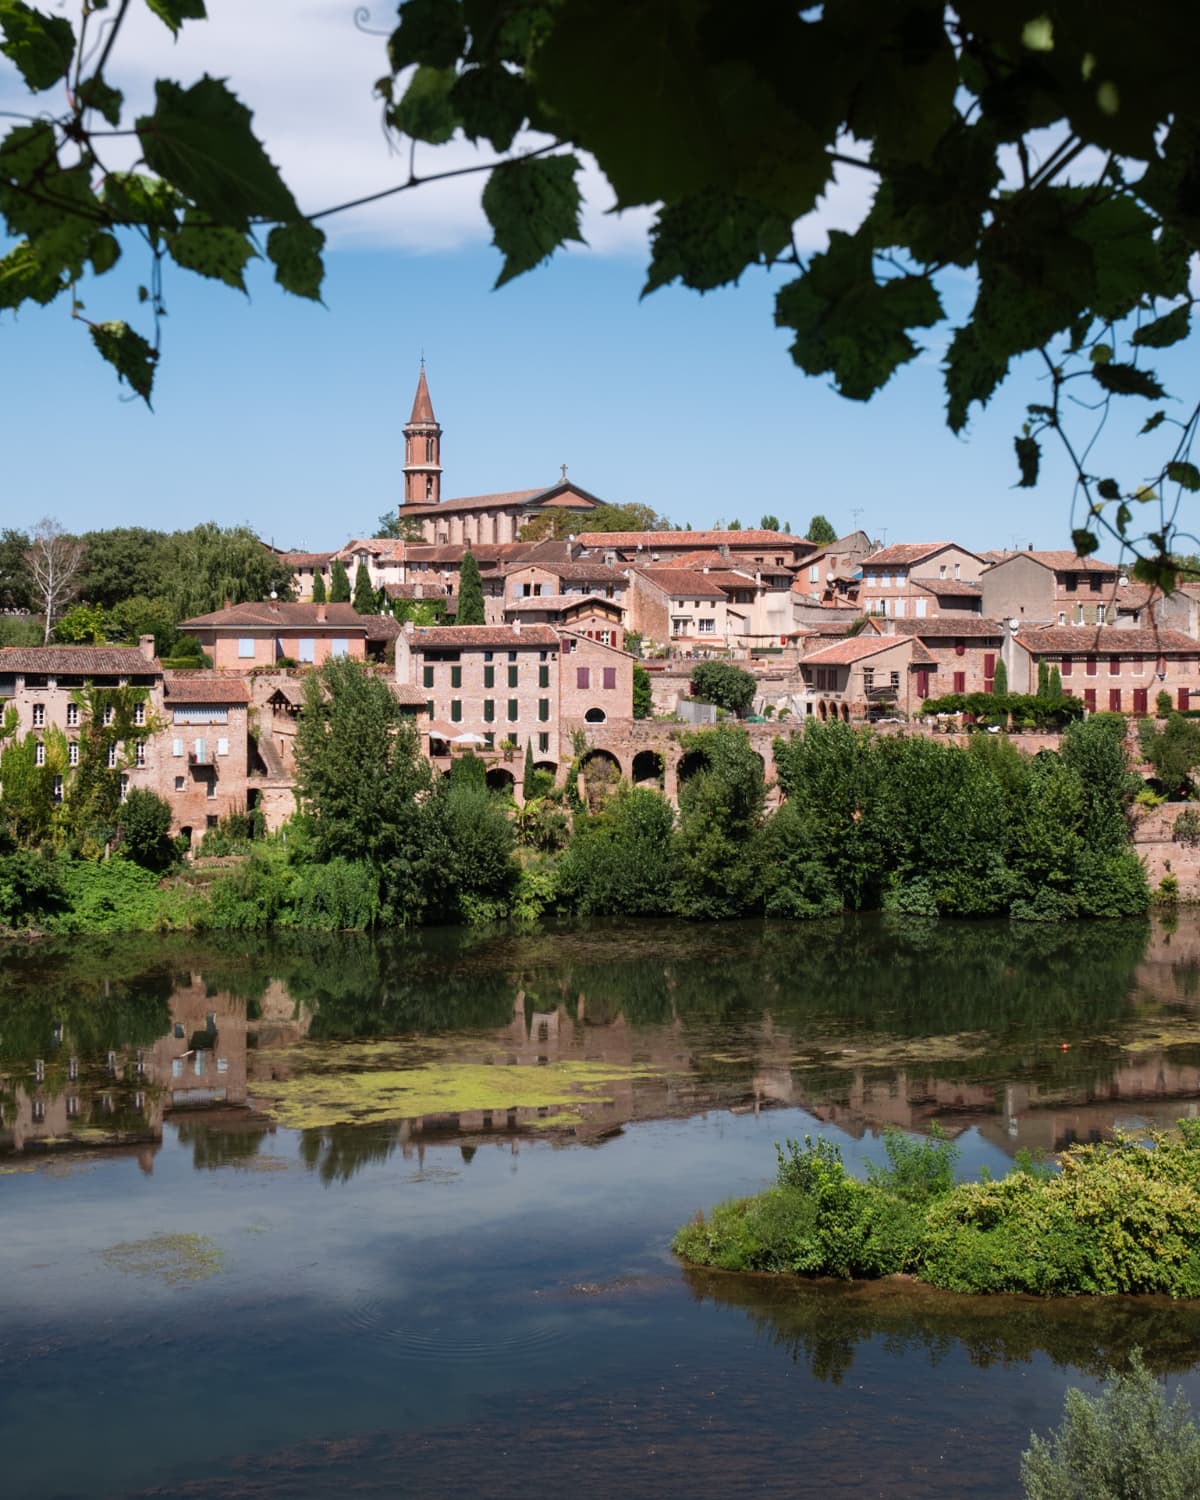 A view of Albi city from the royal gardens of Berbie